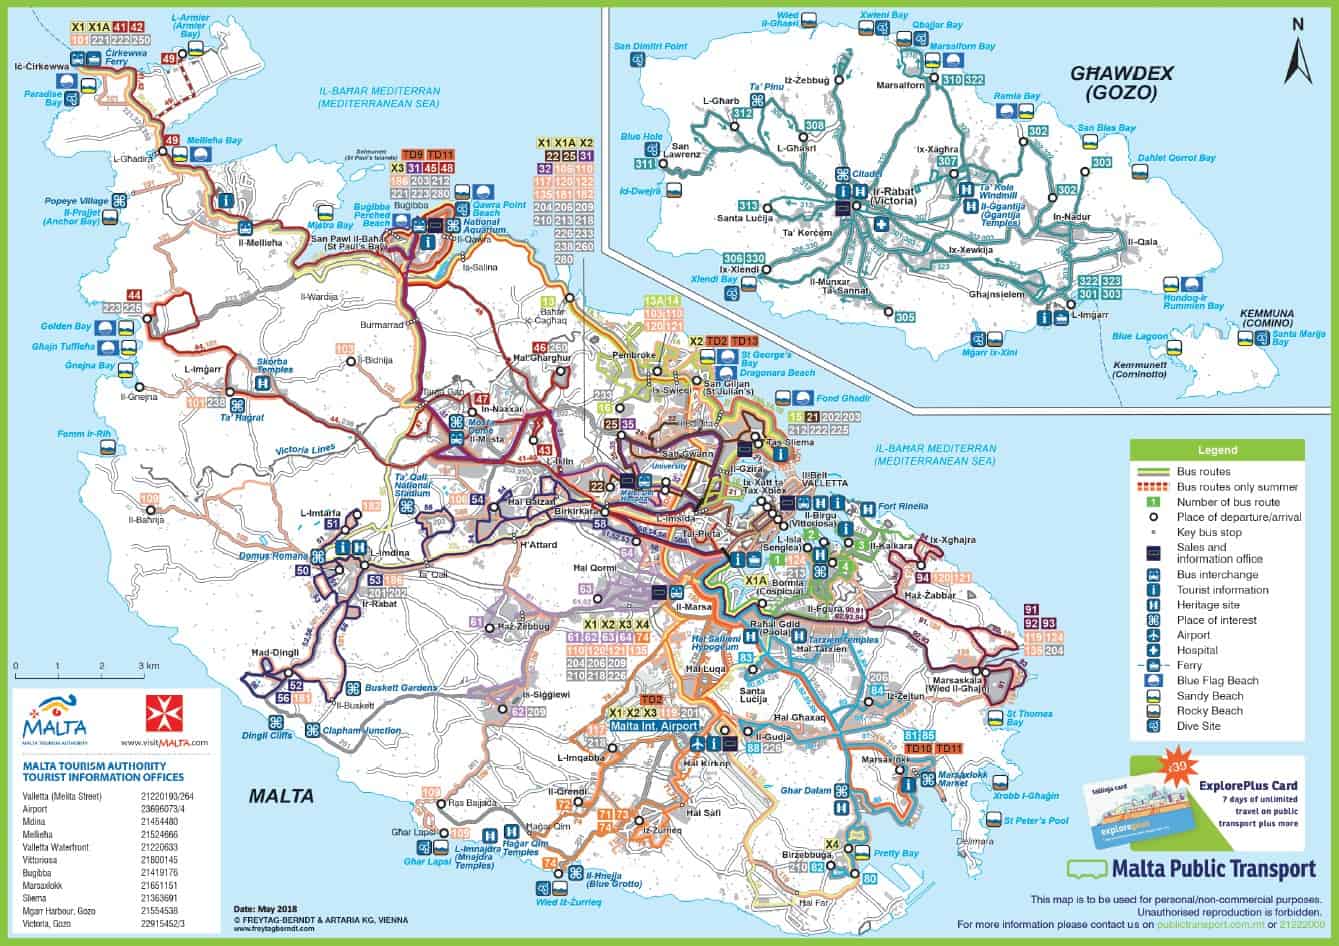 Map of buses and public transport in Malta and Gozo